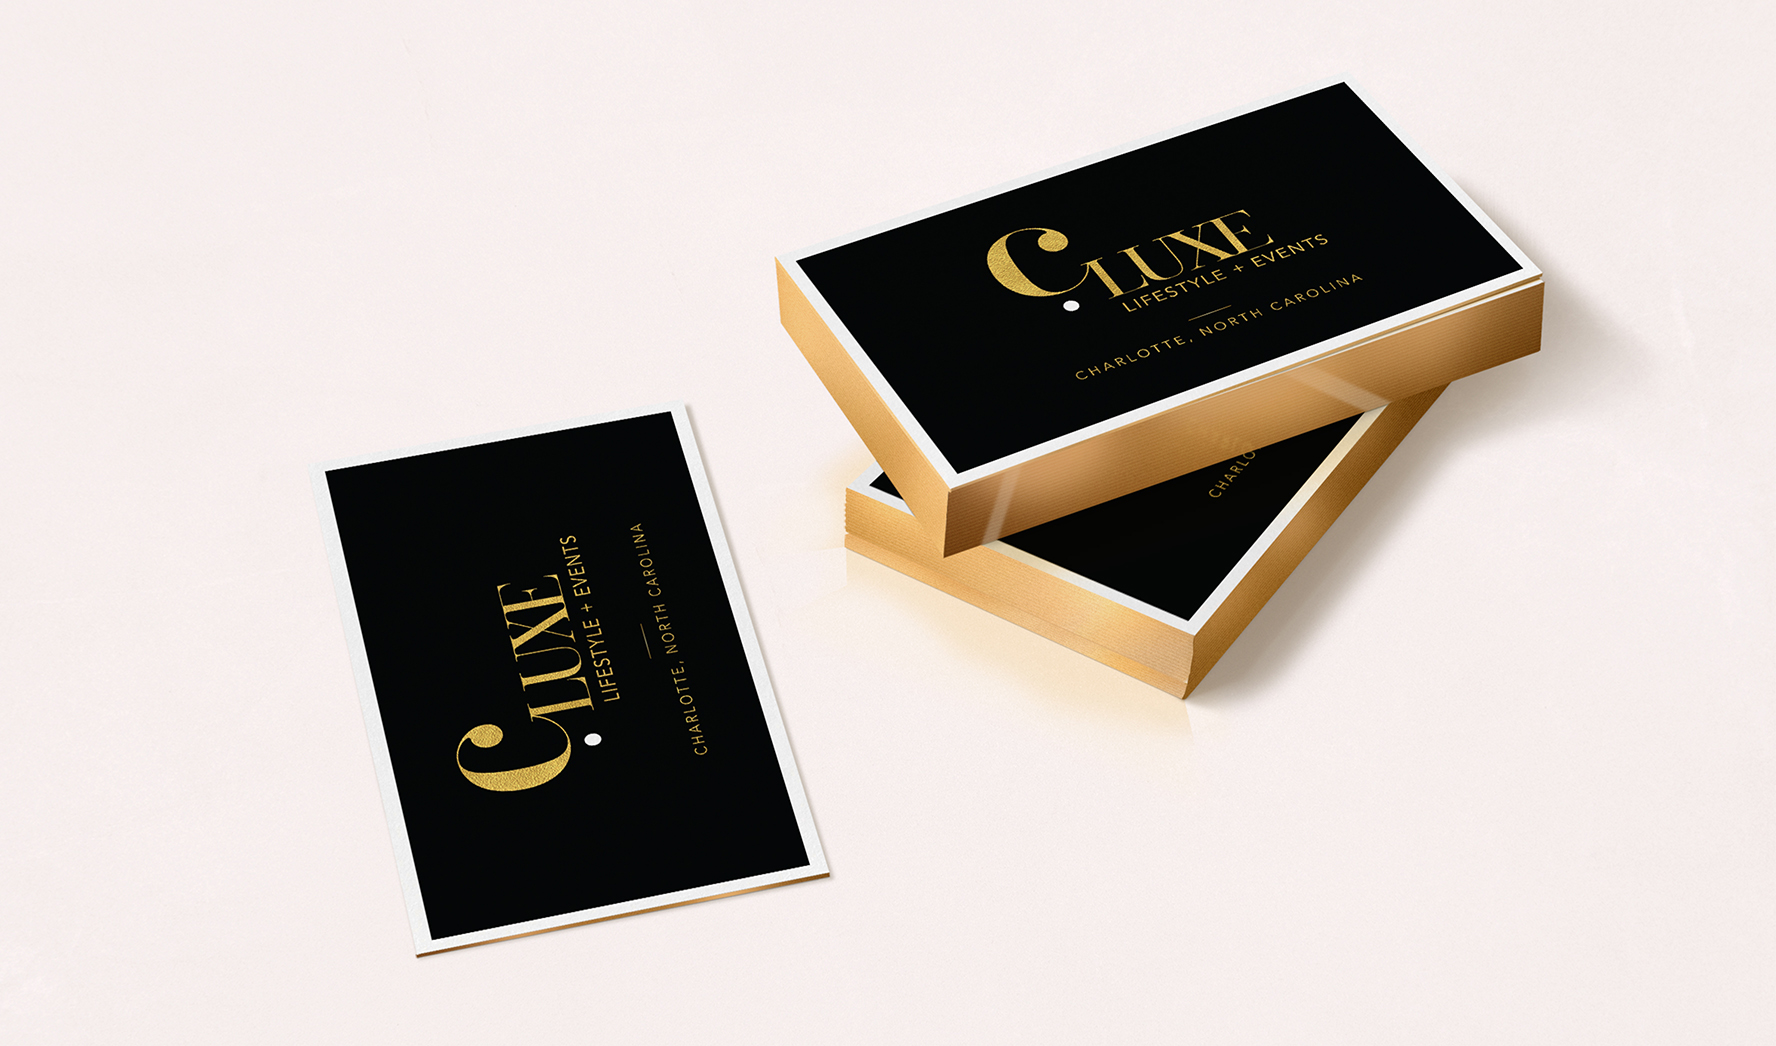 C Luxe Lifestyle and Events